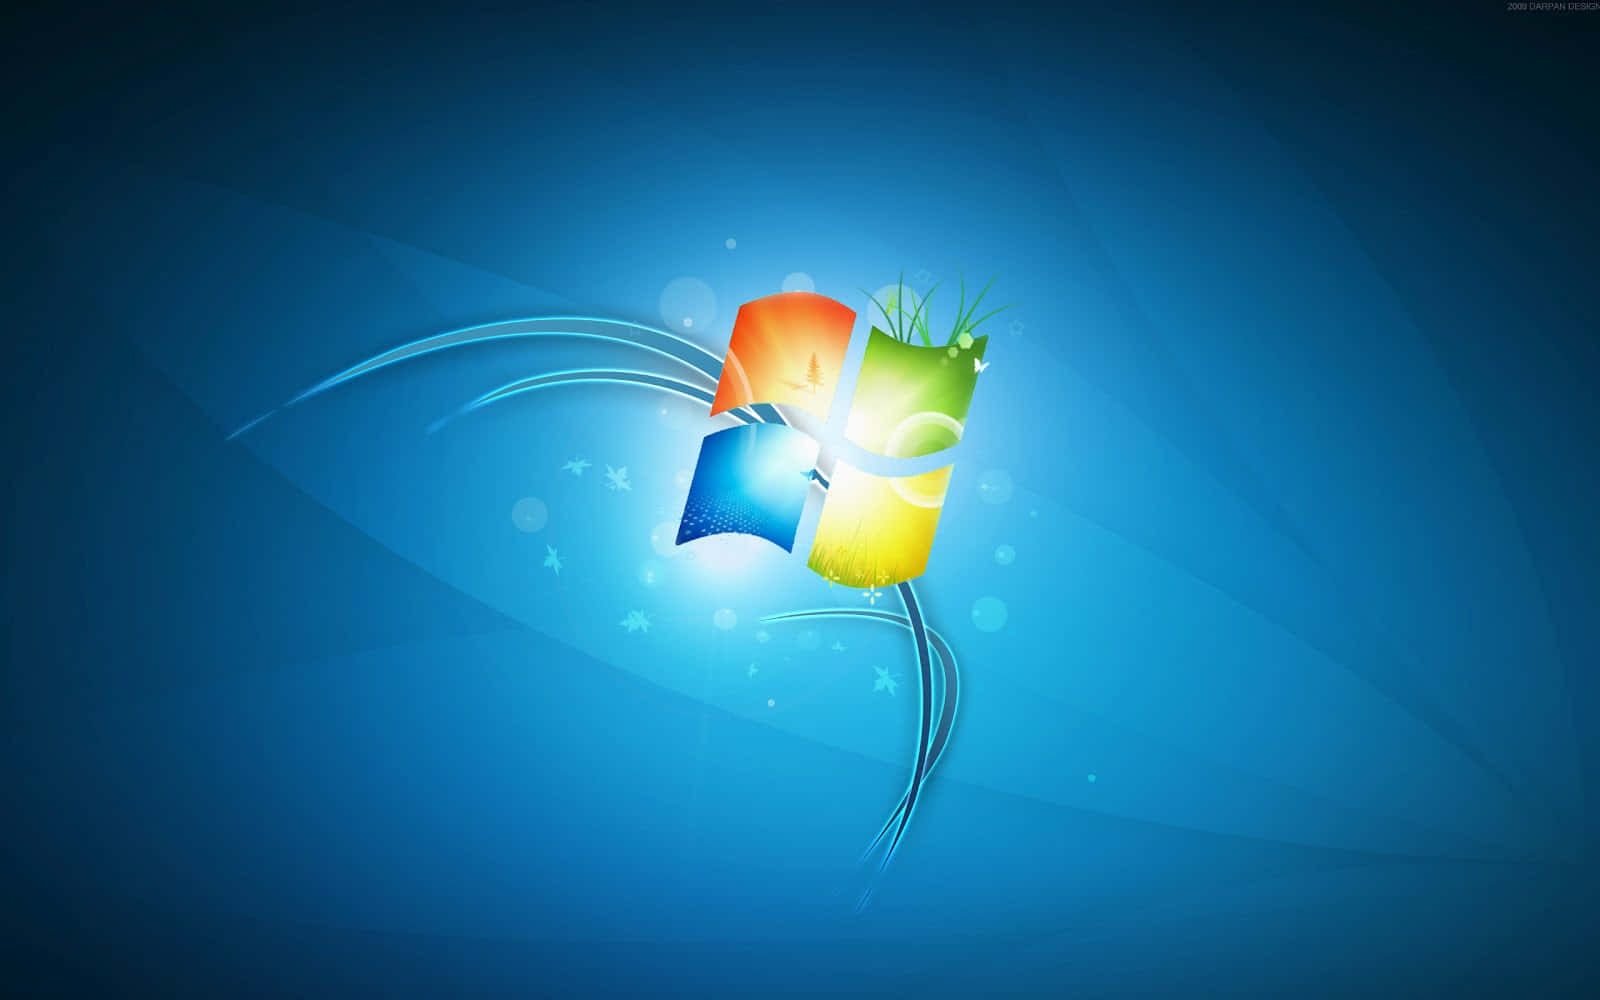 Windows 8 Official Background